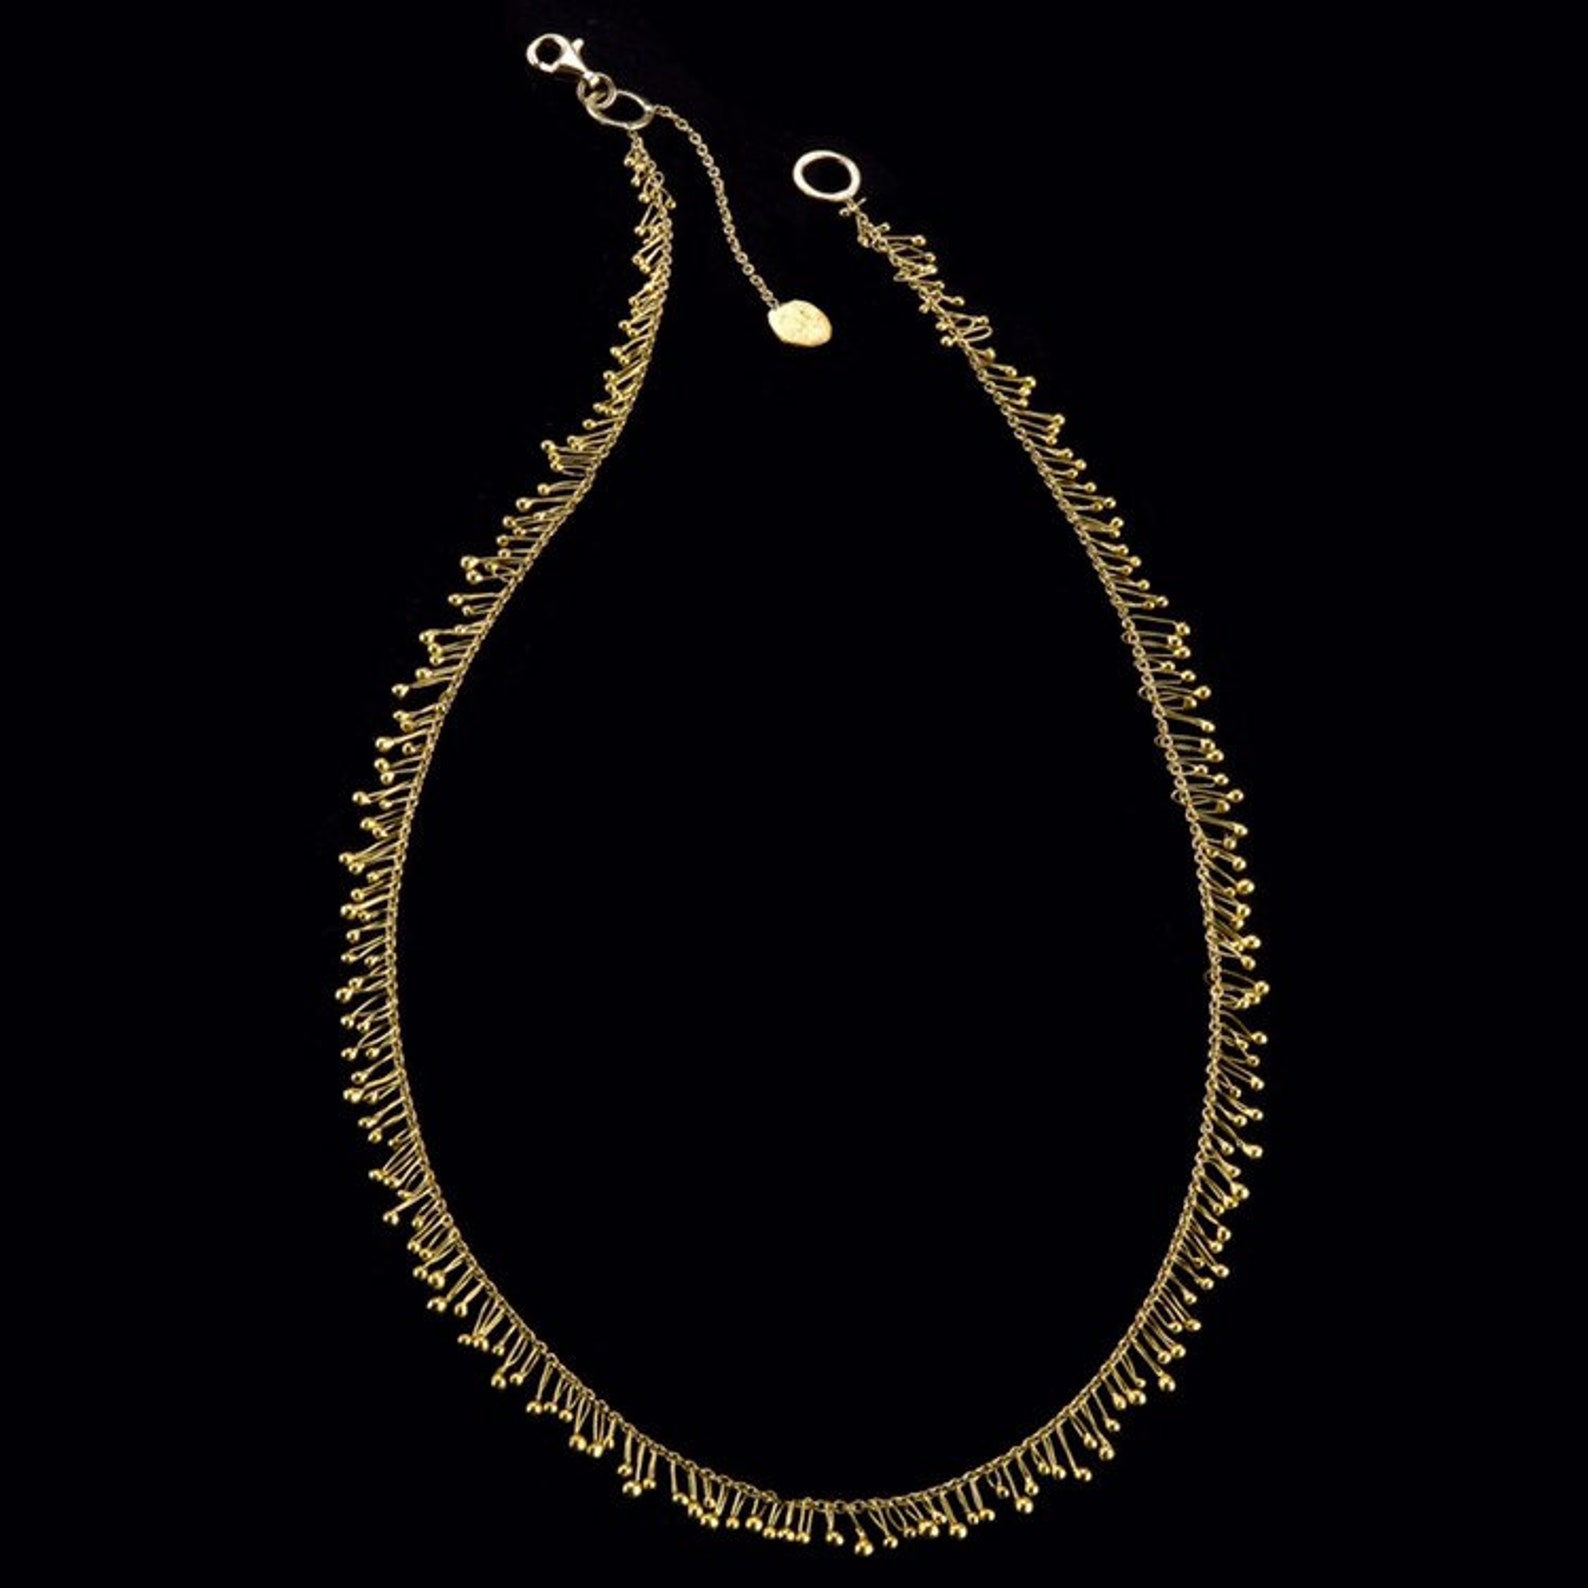 Dancing 22k Solid Gold Drops on 18k Chain Necklace, Delicate & Uniqe ...